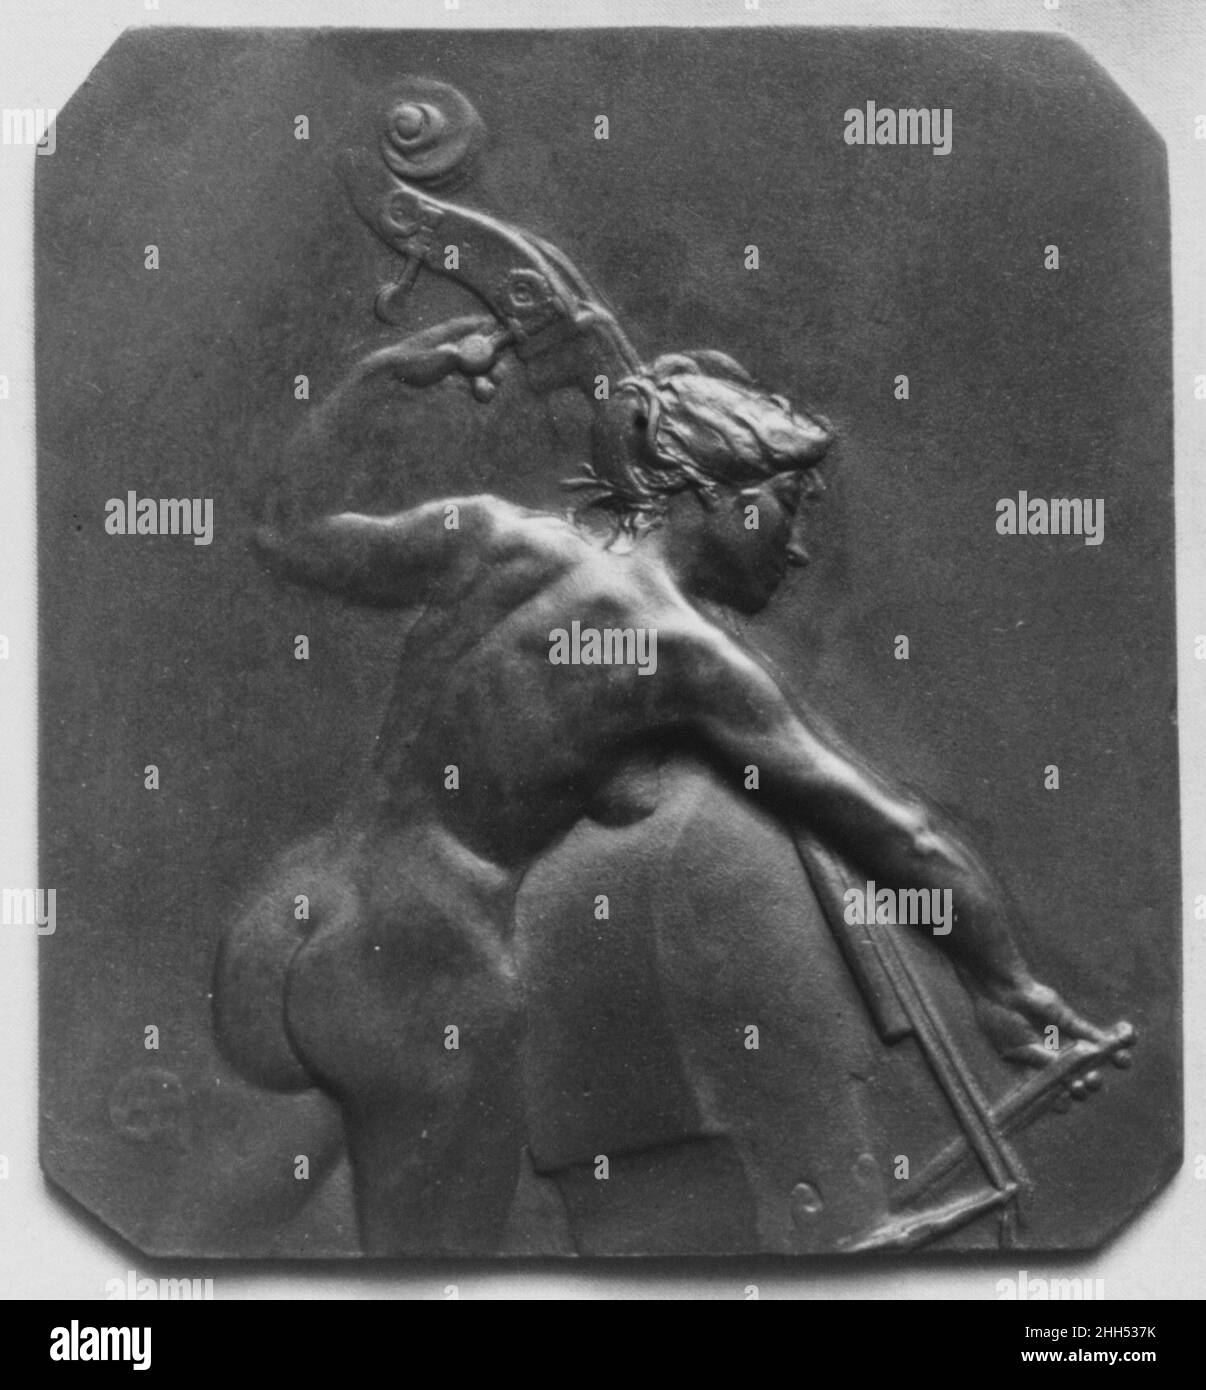 Female figure playing the bass-viol before 1903 Alexandre-Louis-Marie Charpentier. Female figure playing the bass-viol  188810 Artist: Alexandre-Louis-Marie Charpentier, French, Paris 1856?1909 Neuilly, Female figure playing the bass-viol, before 1903, Bronze, cast, 4 1/8 ? 3 11/16 in. (10.5 ? 9.4 cm). The Metropolitan Museum of Art, New York. Gift of Victor D. Brenner, 1903 (03.7.19) Stock Photo